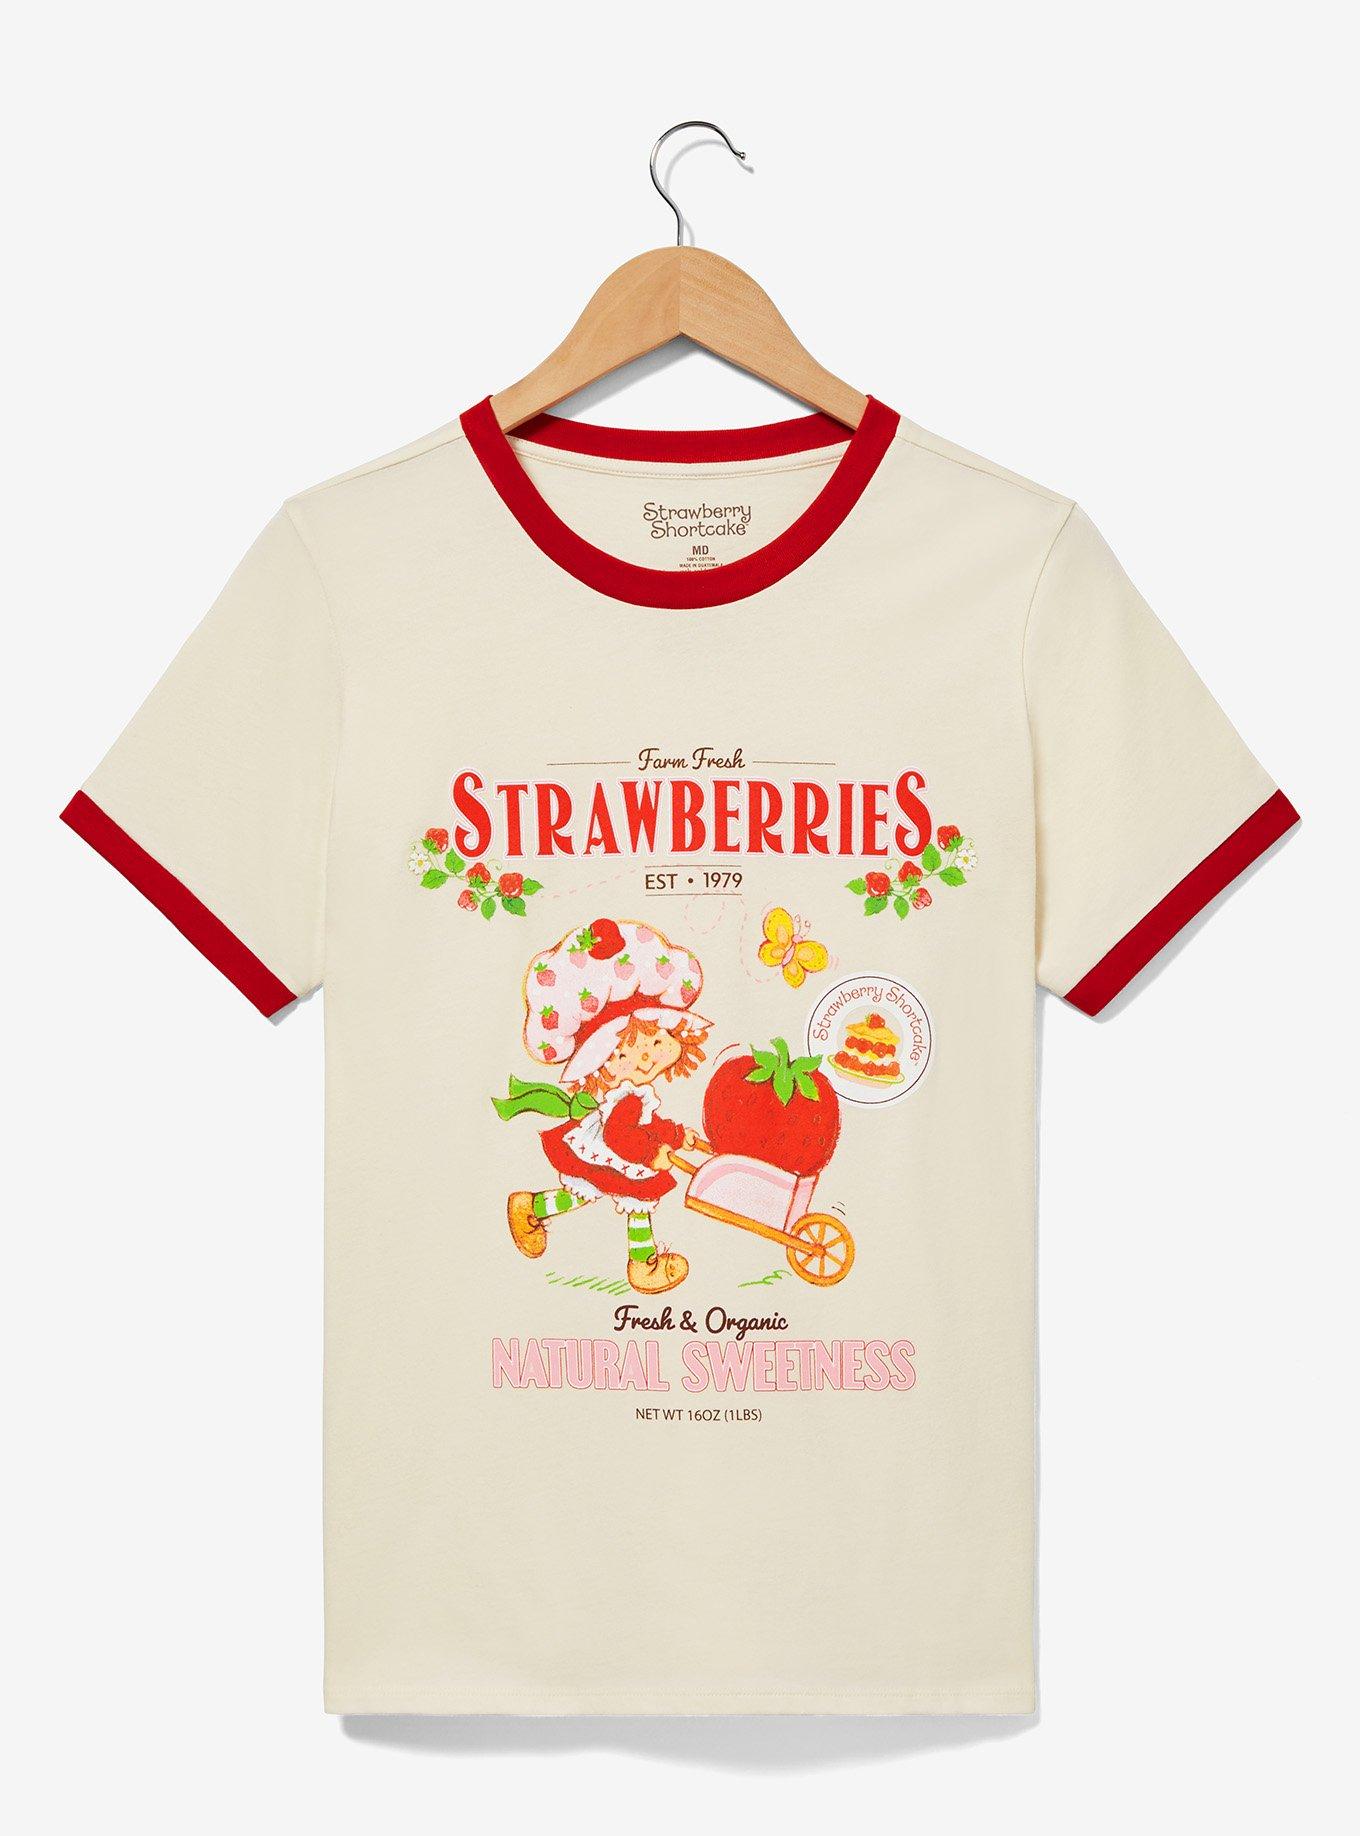 Strawberry Shortcake Merch & Gifts for Sale